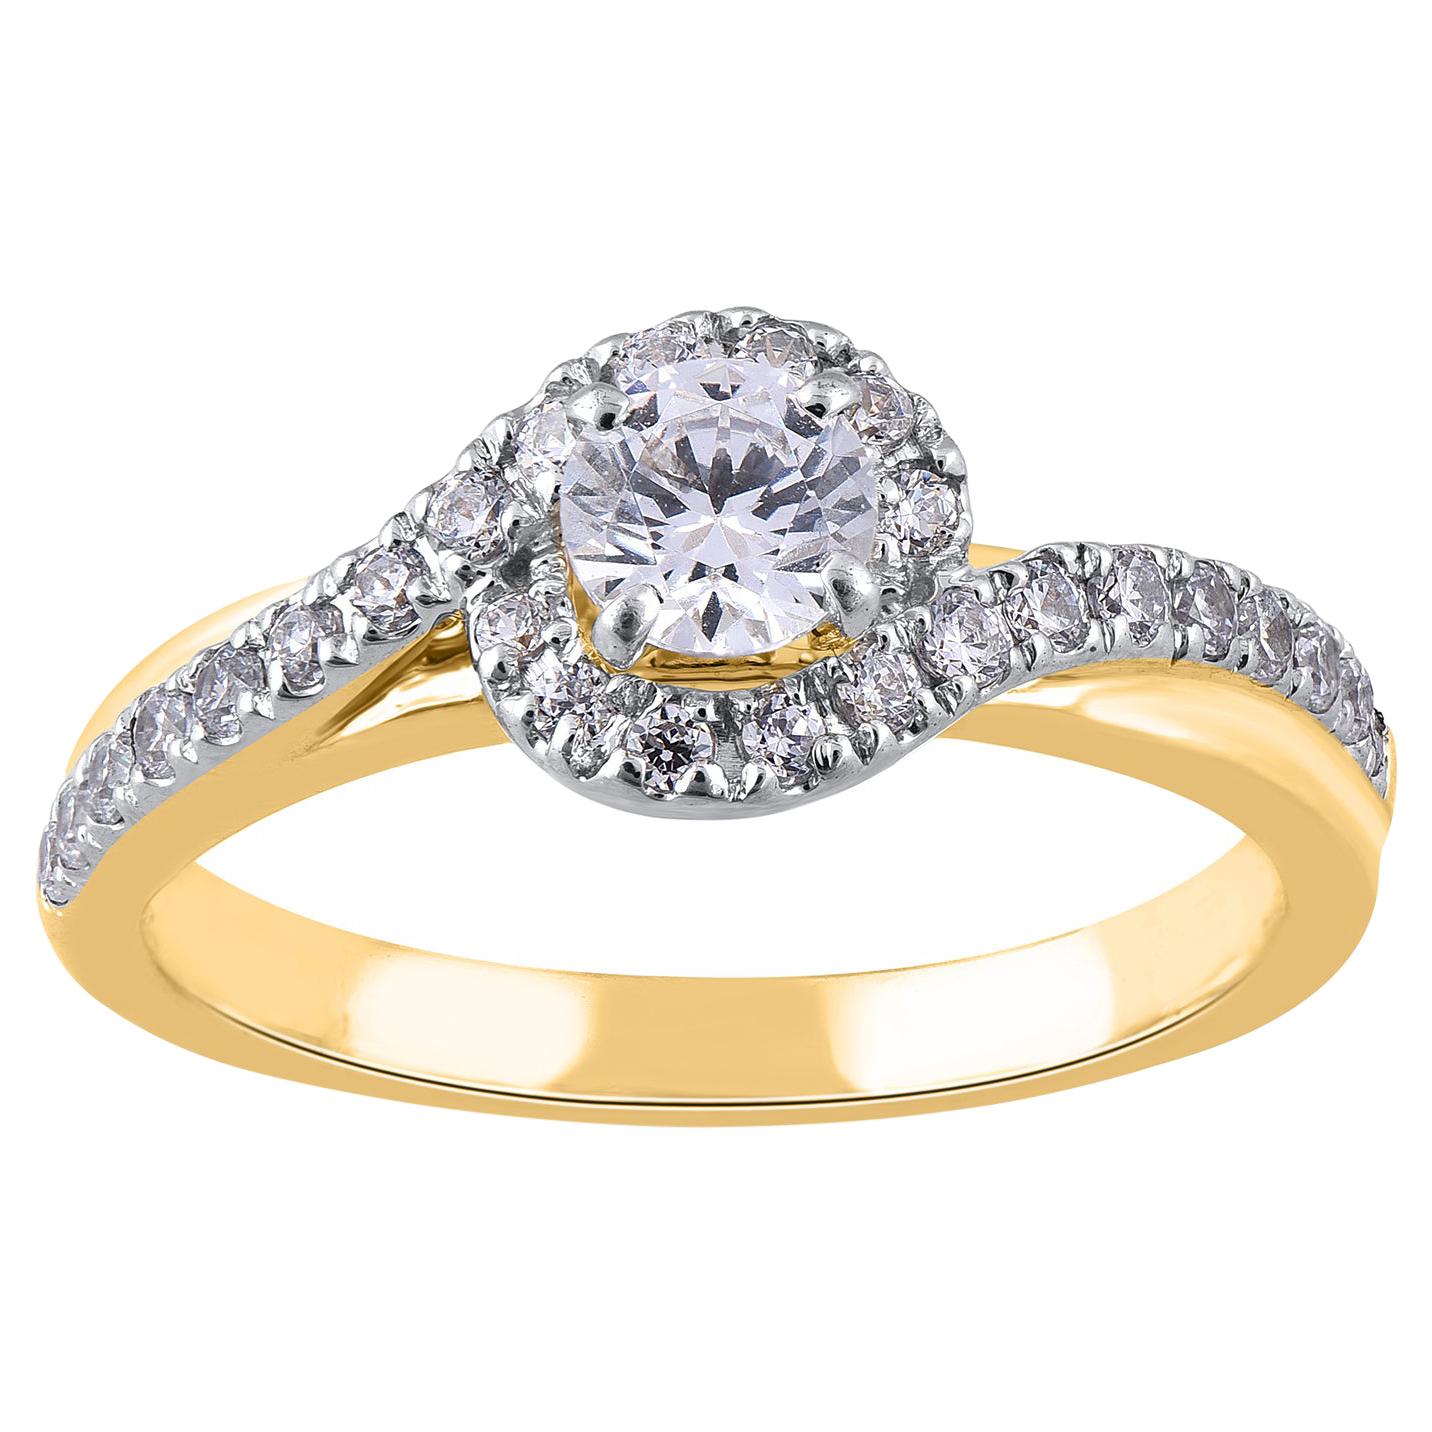 TJD 0.75Ct Round Diamond 18Karat Yellow Gold Engagement Ring with Curvy Shank For Sale